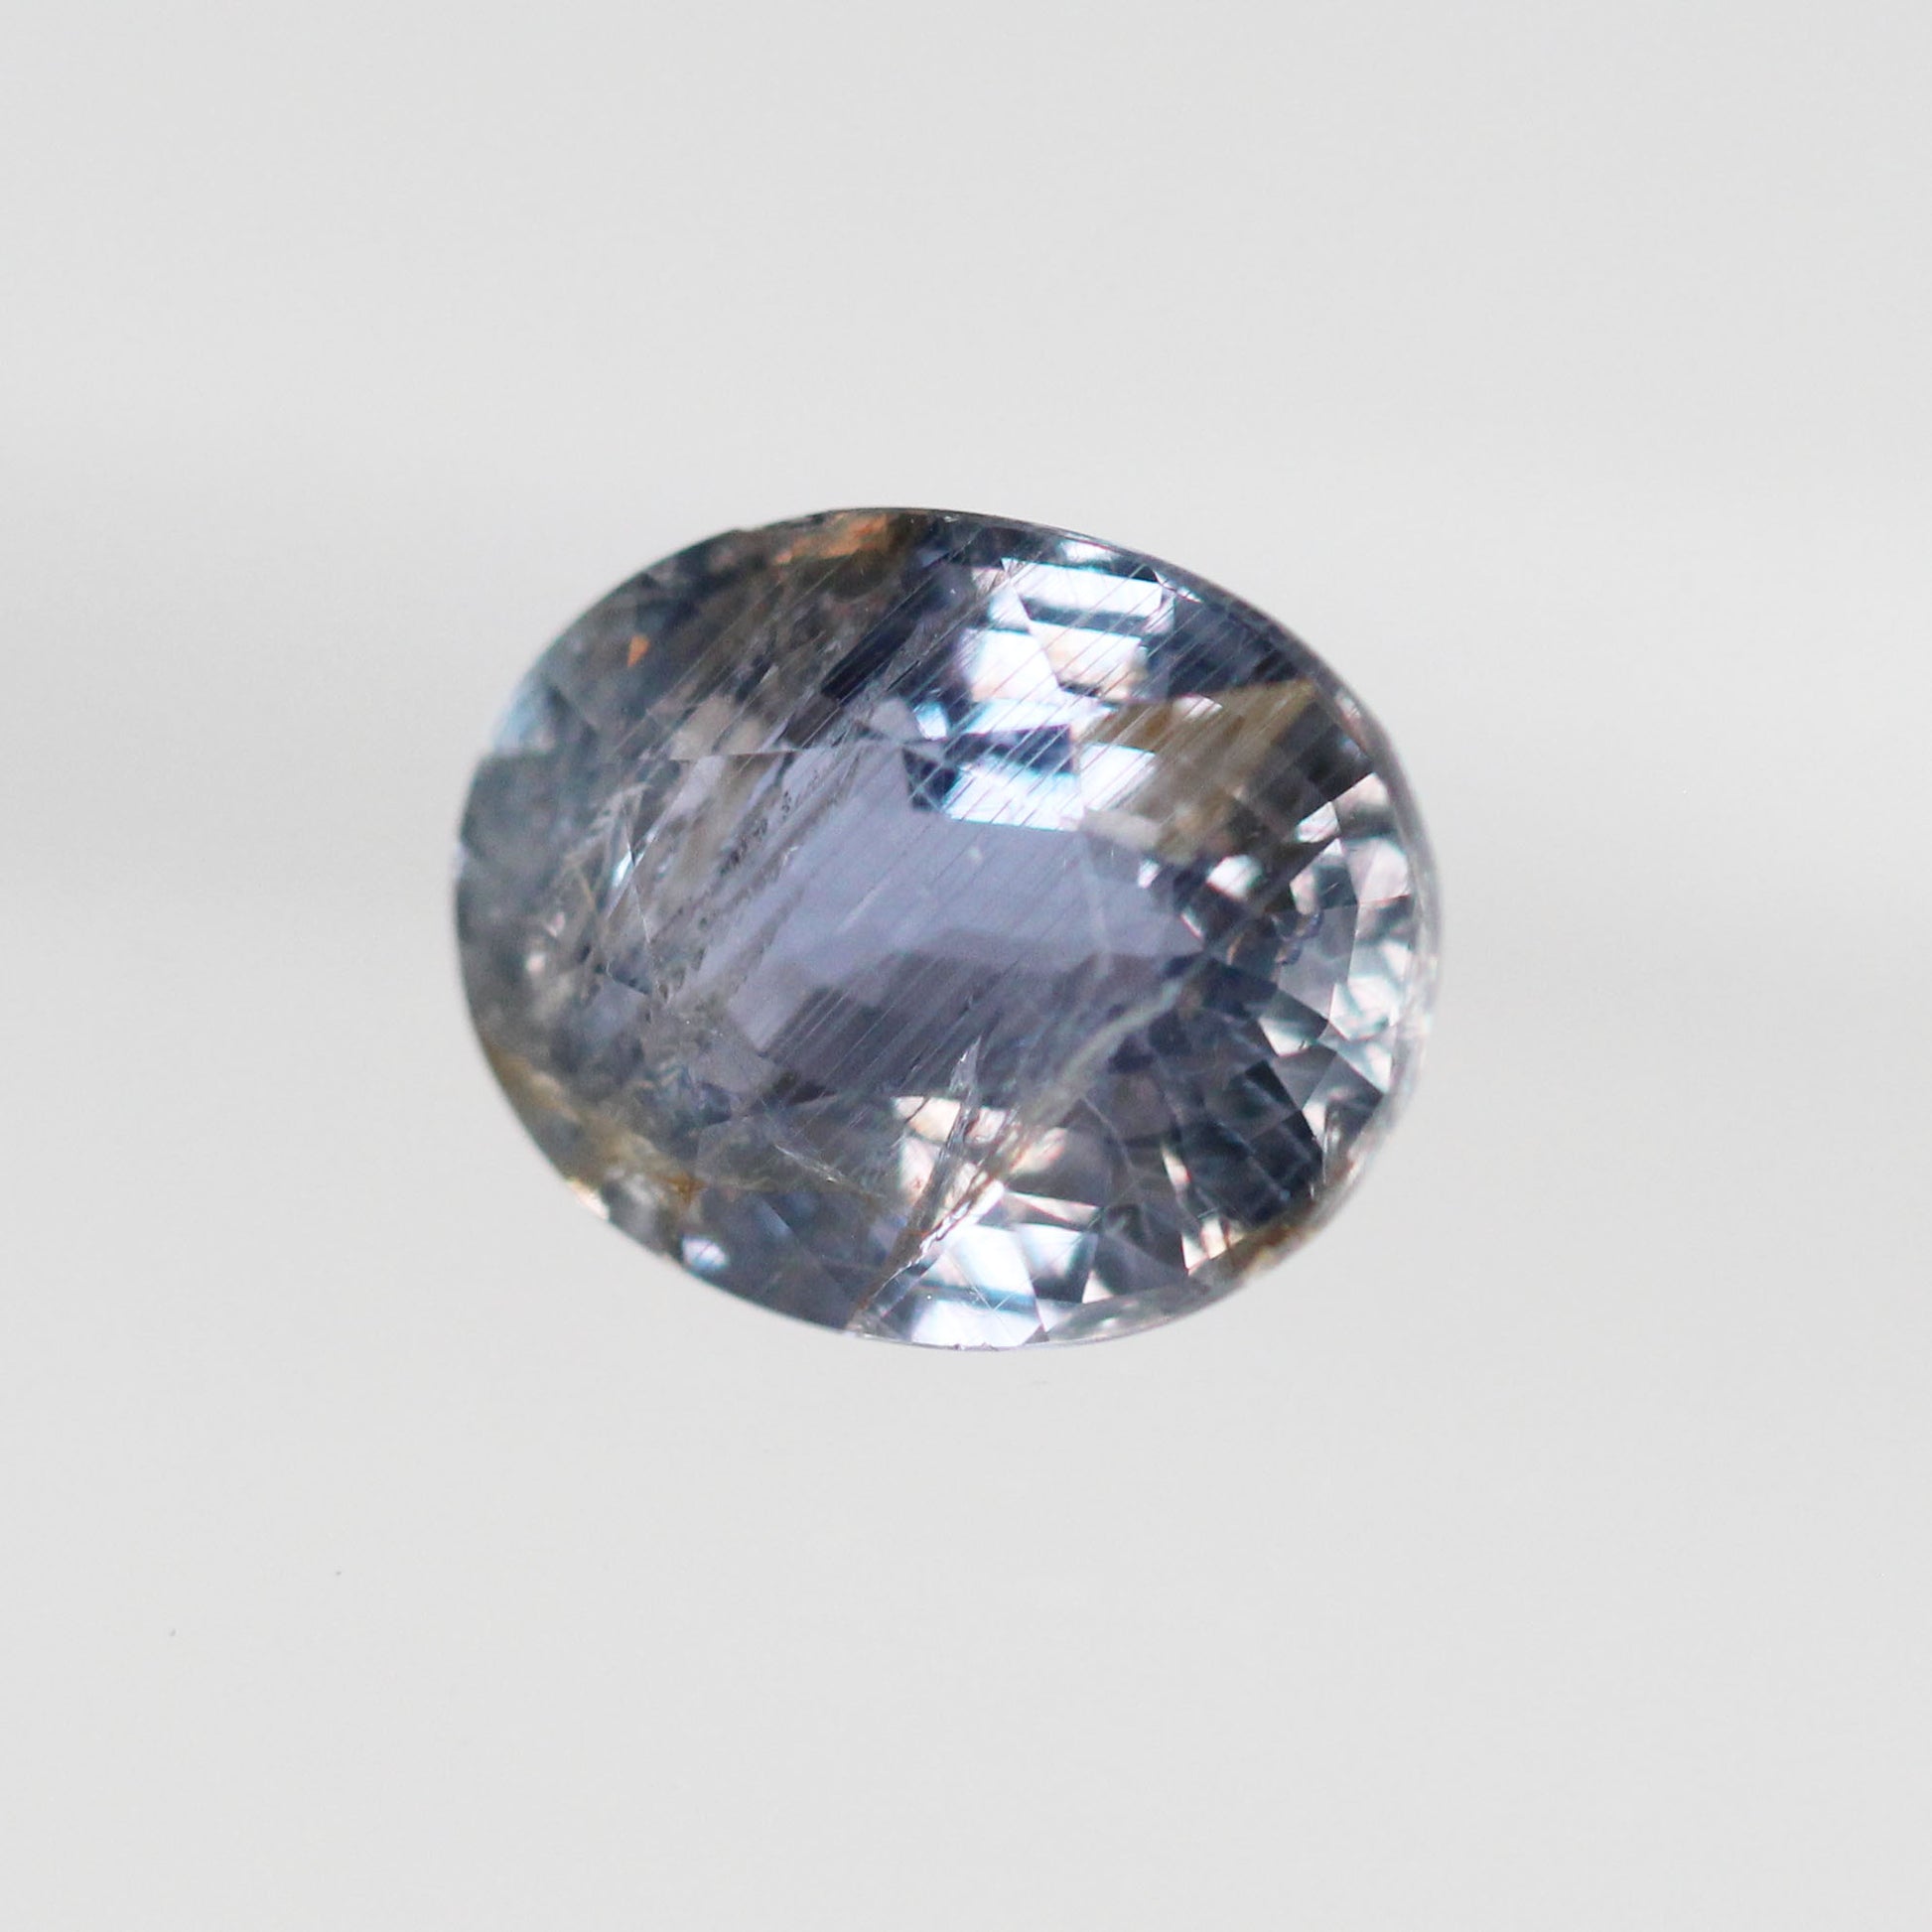 5.43 Carat Oval Sapphire for Custom Work - Inventory Code OBSAP543 - Midwinter Co. Alternative Bridal Rings and Modern Fine Jewelry